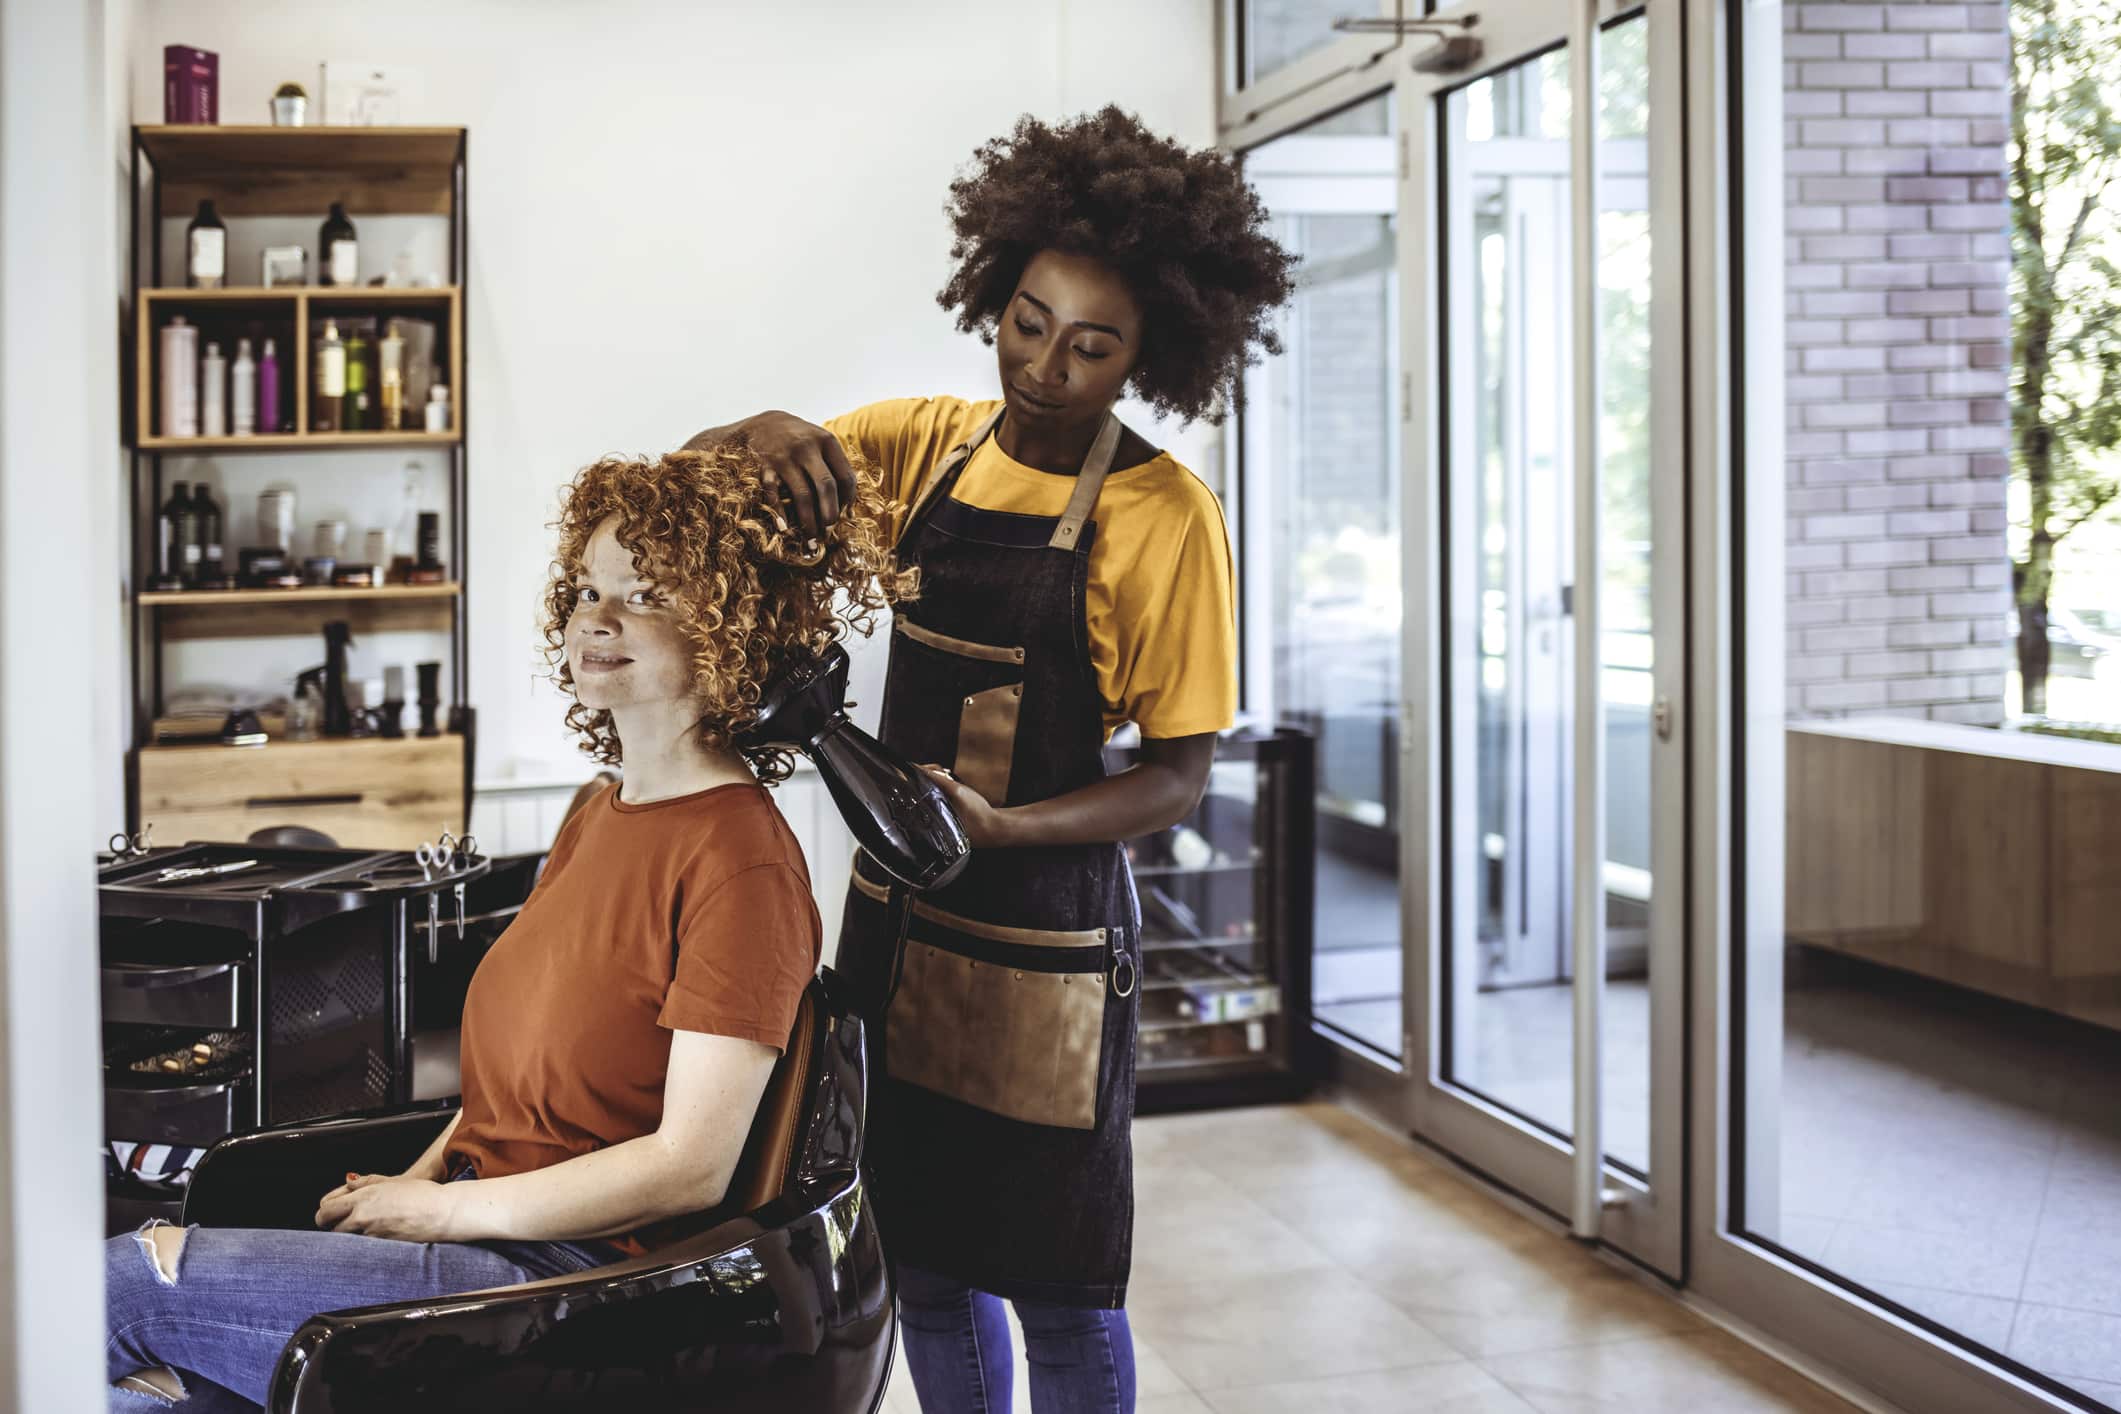 Hair Salon Industry Trends for Growing Your Salon Business